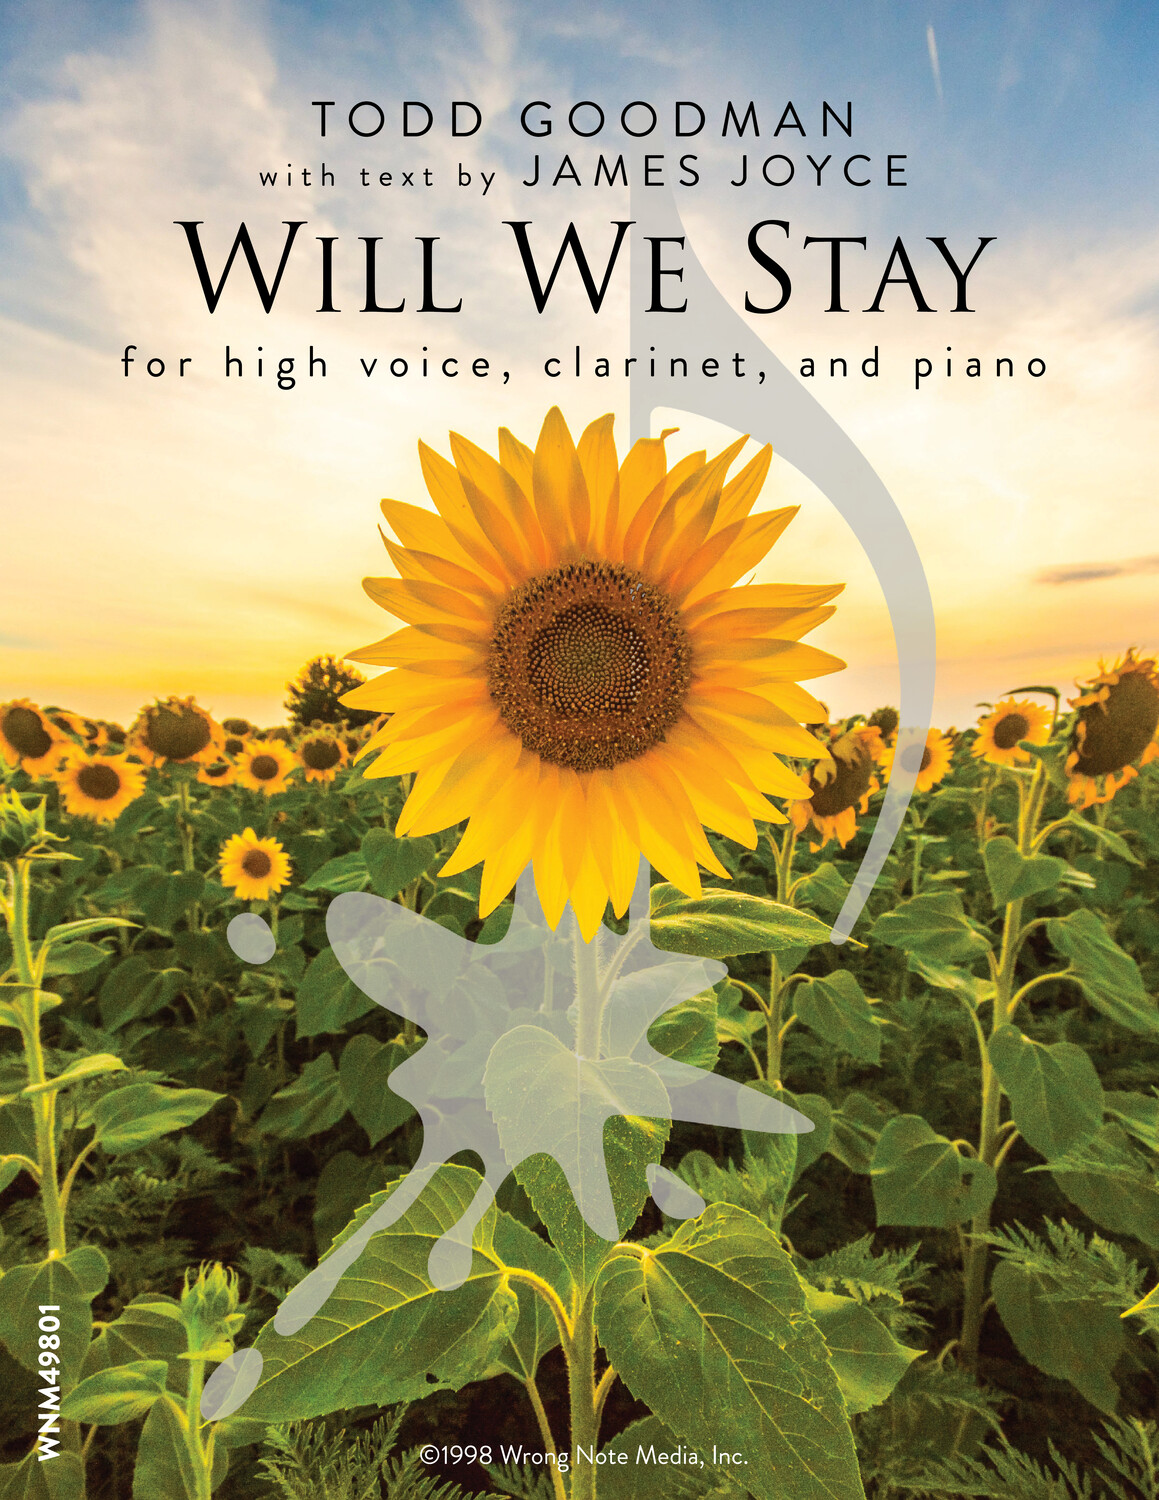 WILL WE STAY by Todd Goodman